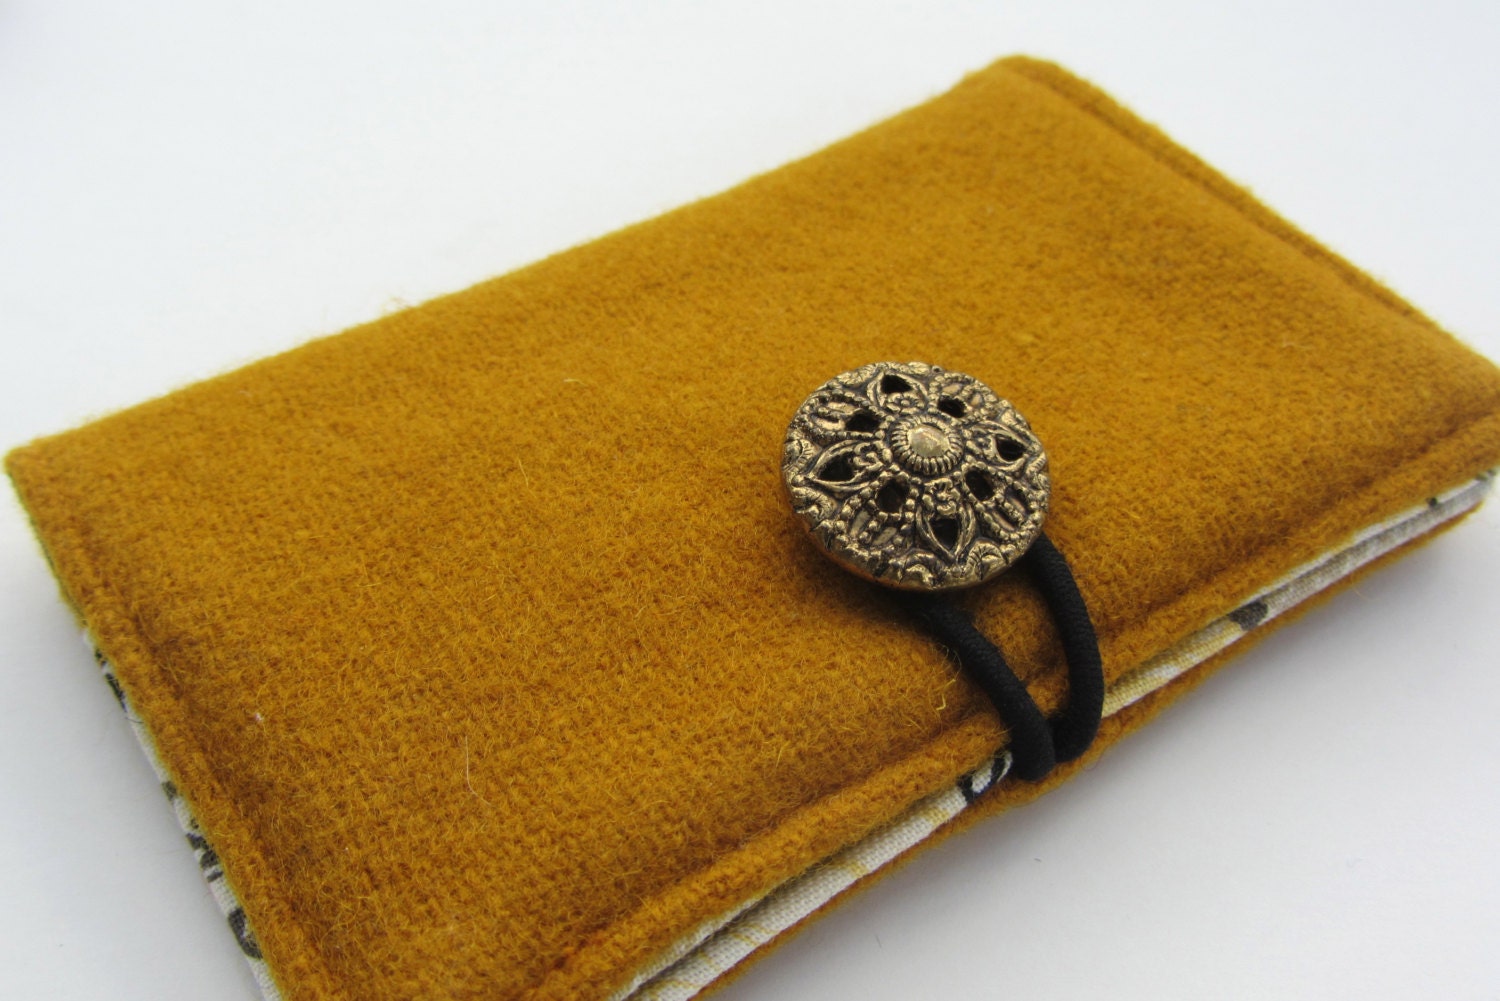 Upcycled Wool Bifold w/ Vintage Button Closure and Cotton Print Lining - Gold (BF-27) - STRUCTUREbags